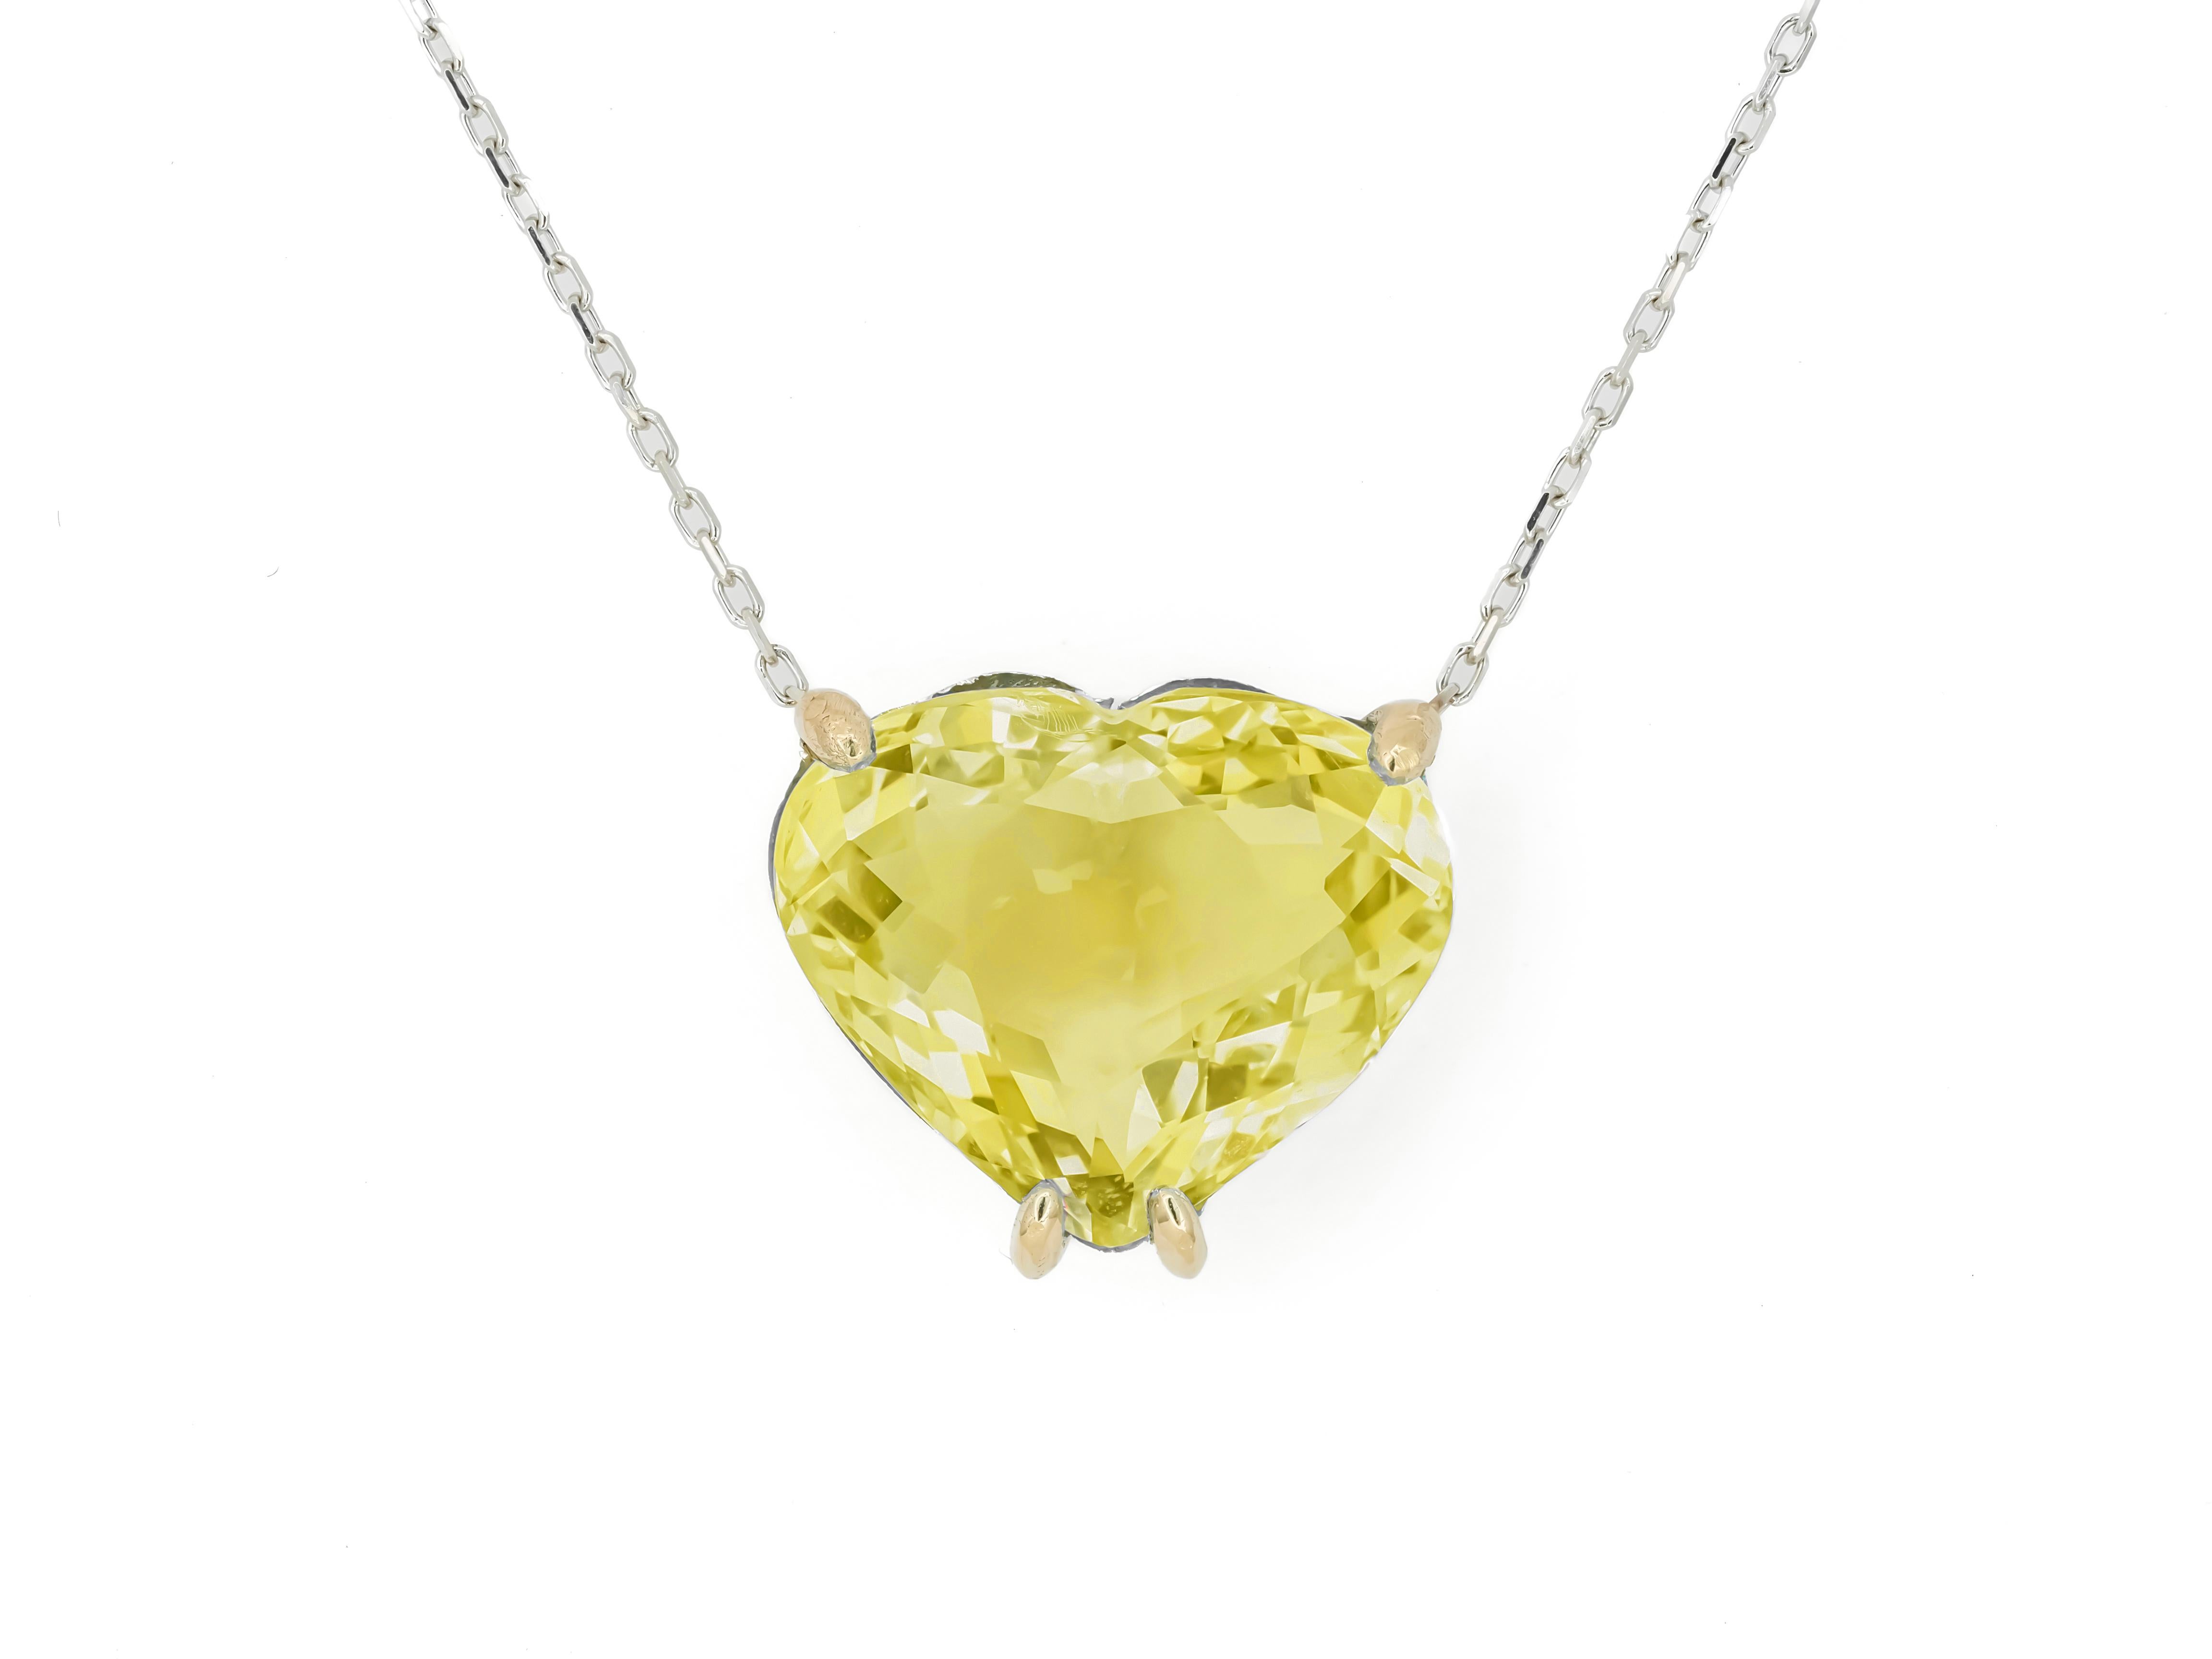 Women's Heart shaped citrine pendant necklace in 14k gold.  For Sale